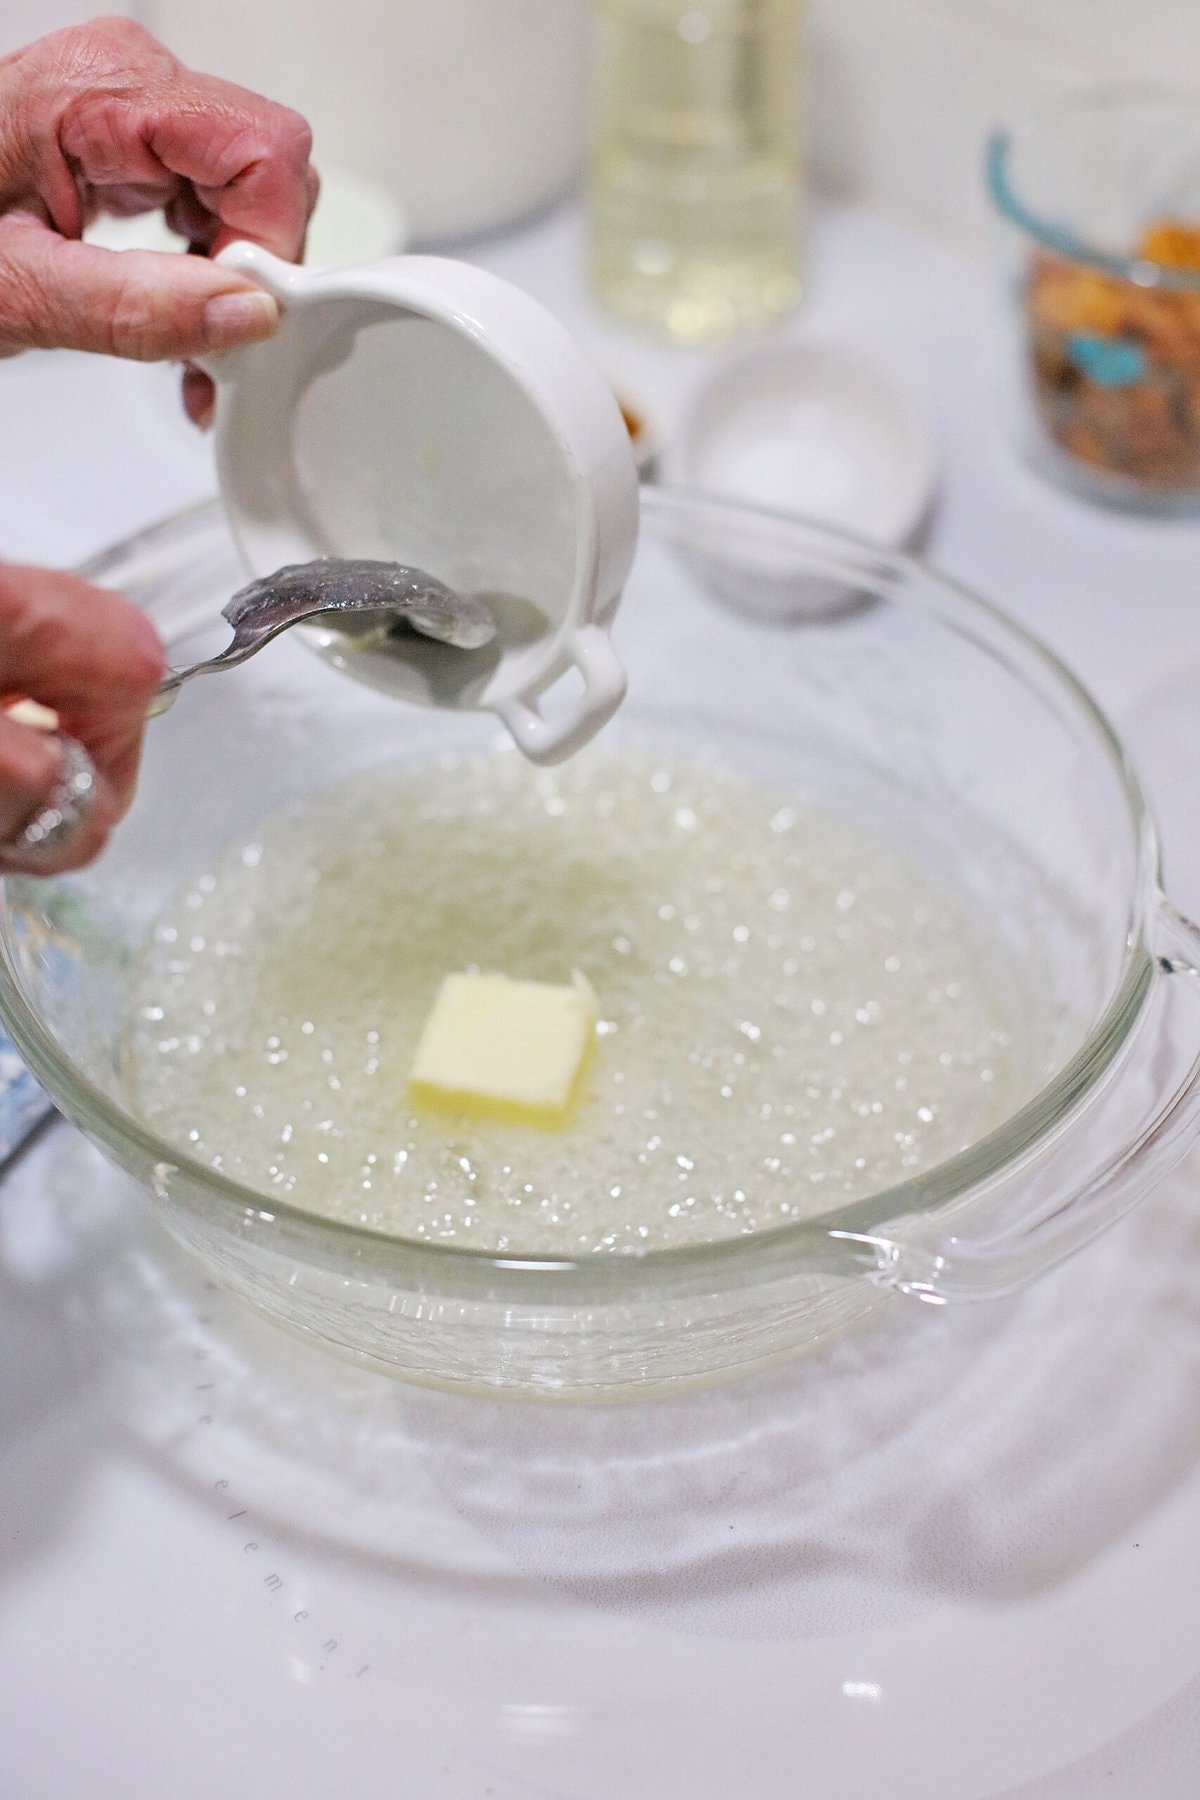 Adding the butter.